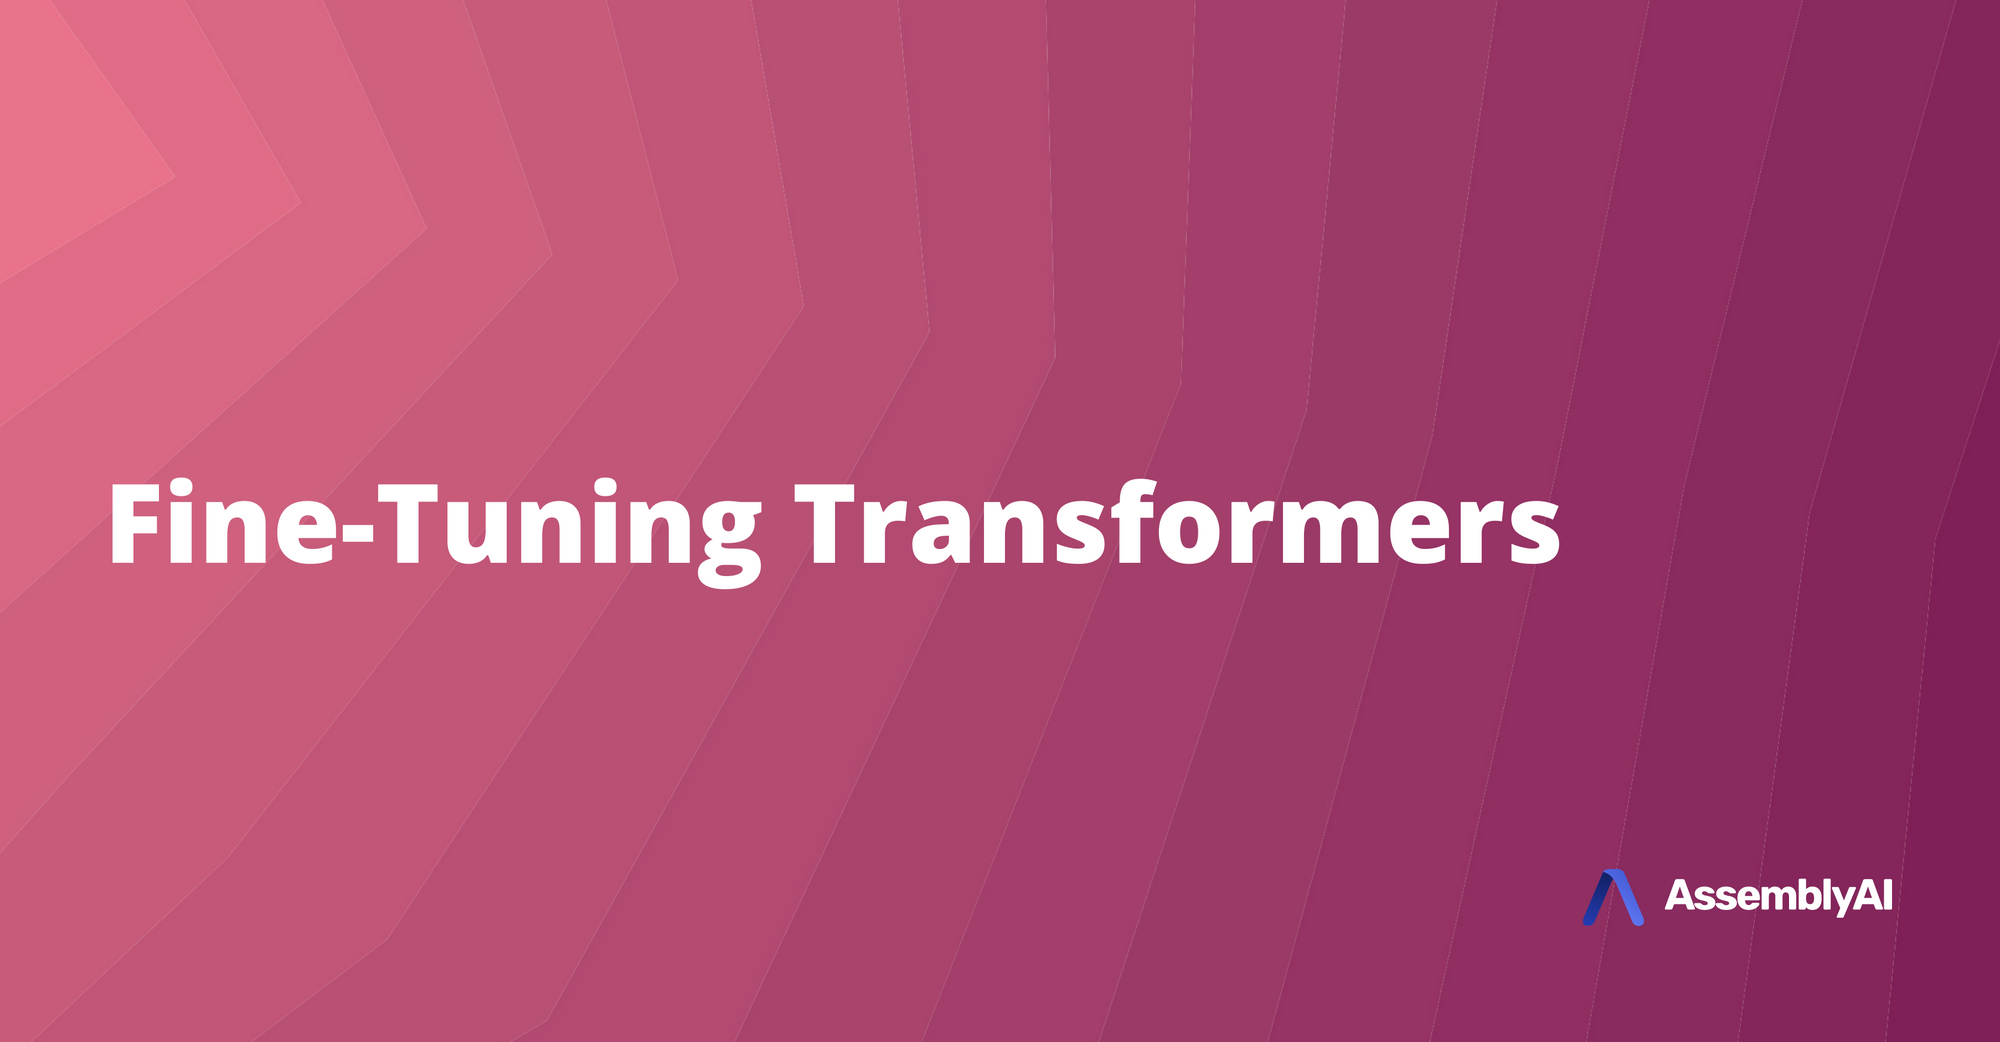 Fine-Tuning Transformers for NLP